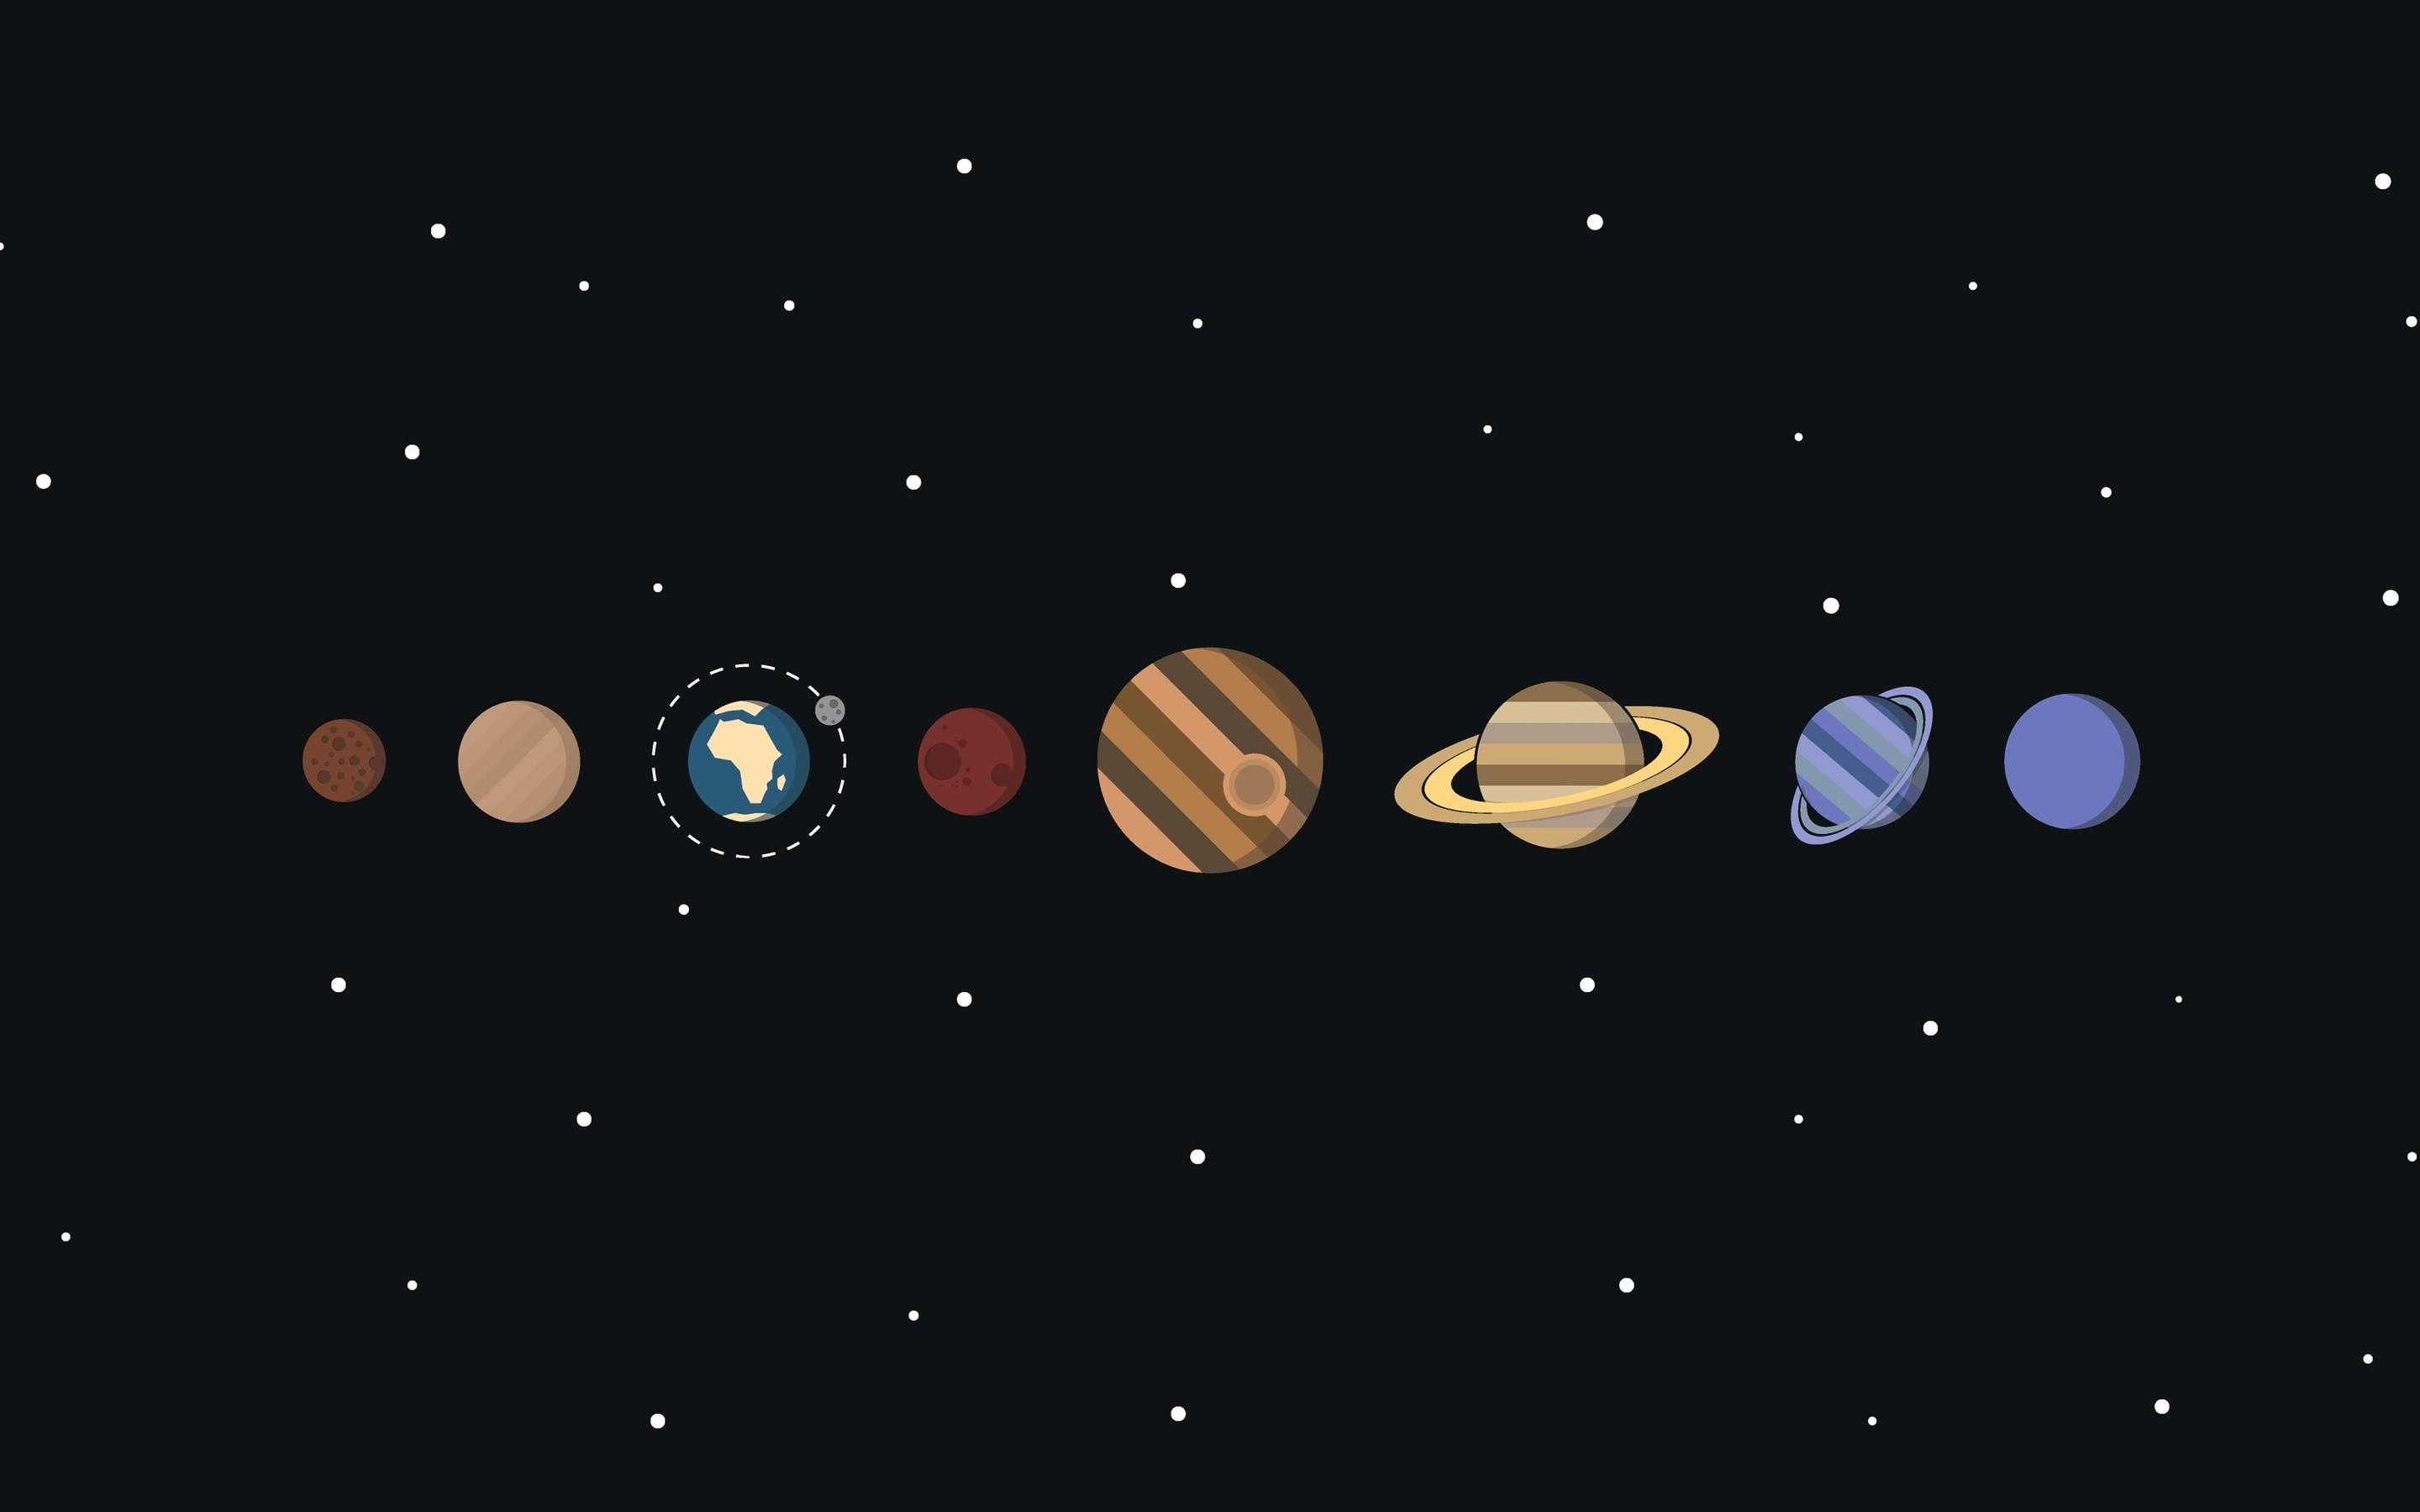 An illustration of the planets in our solar system. - Space